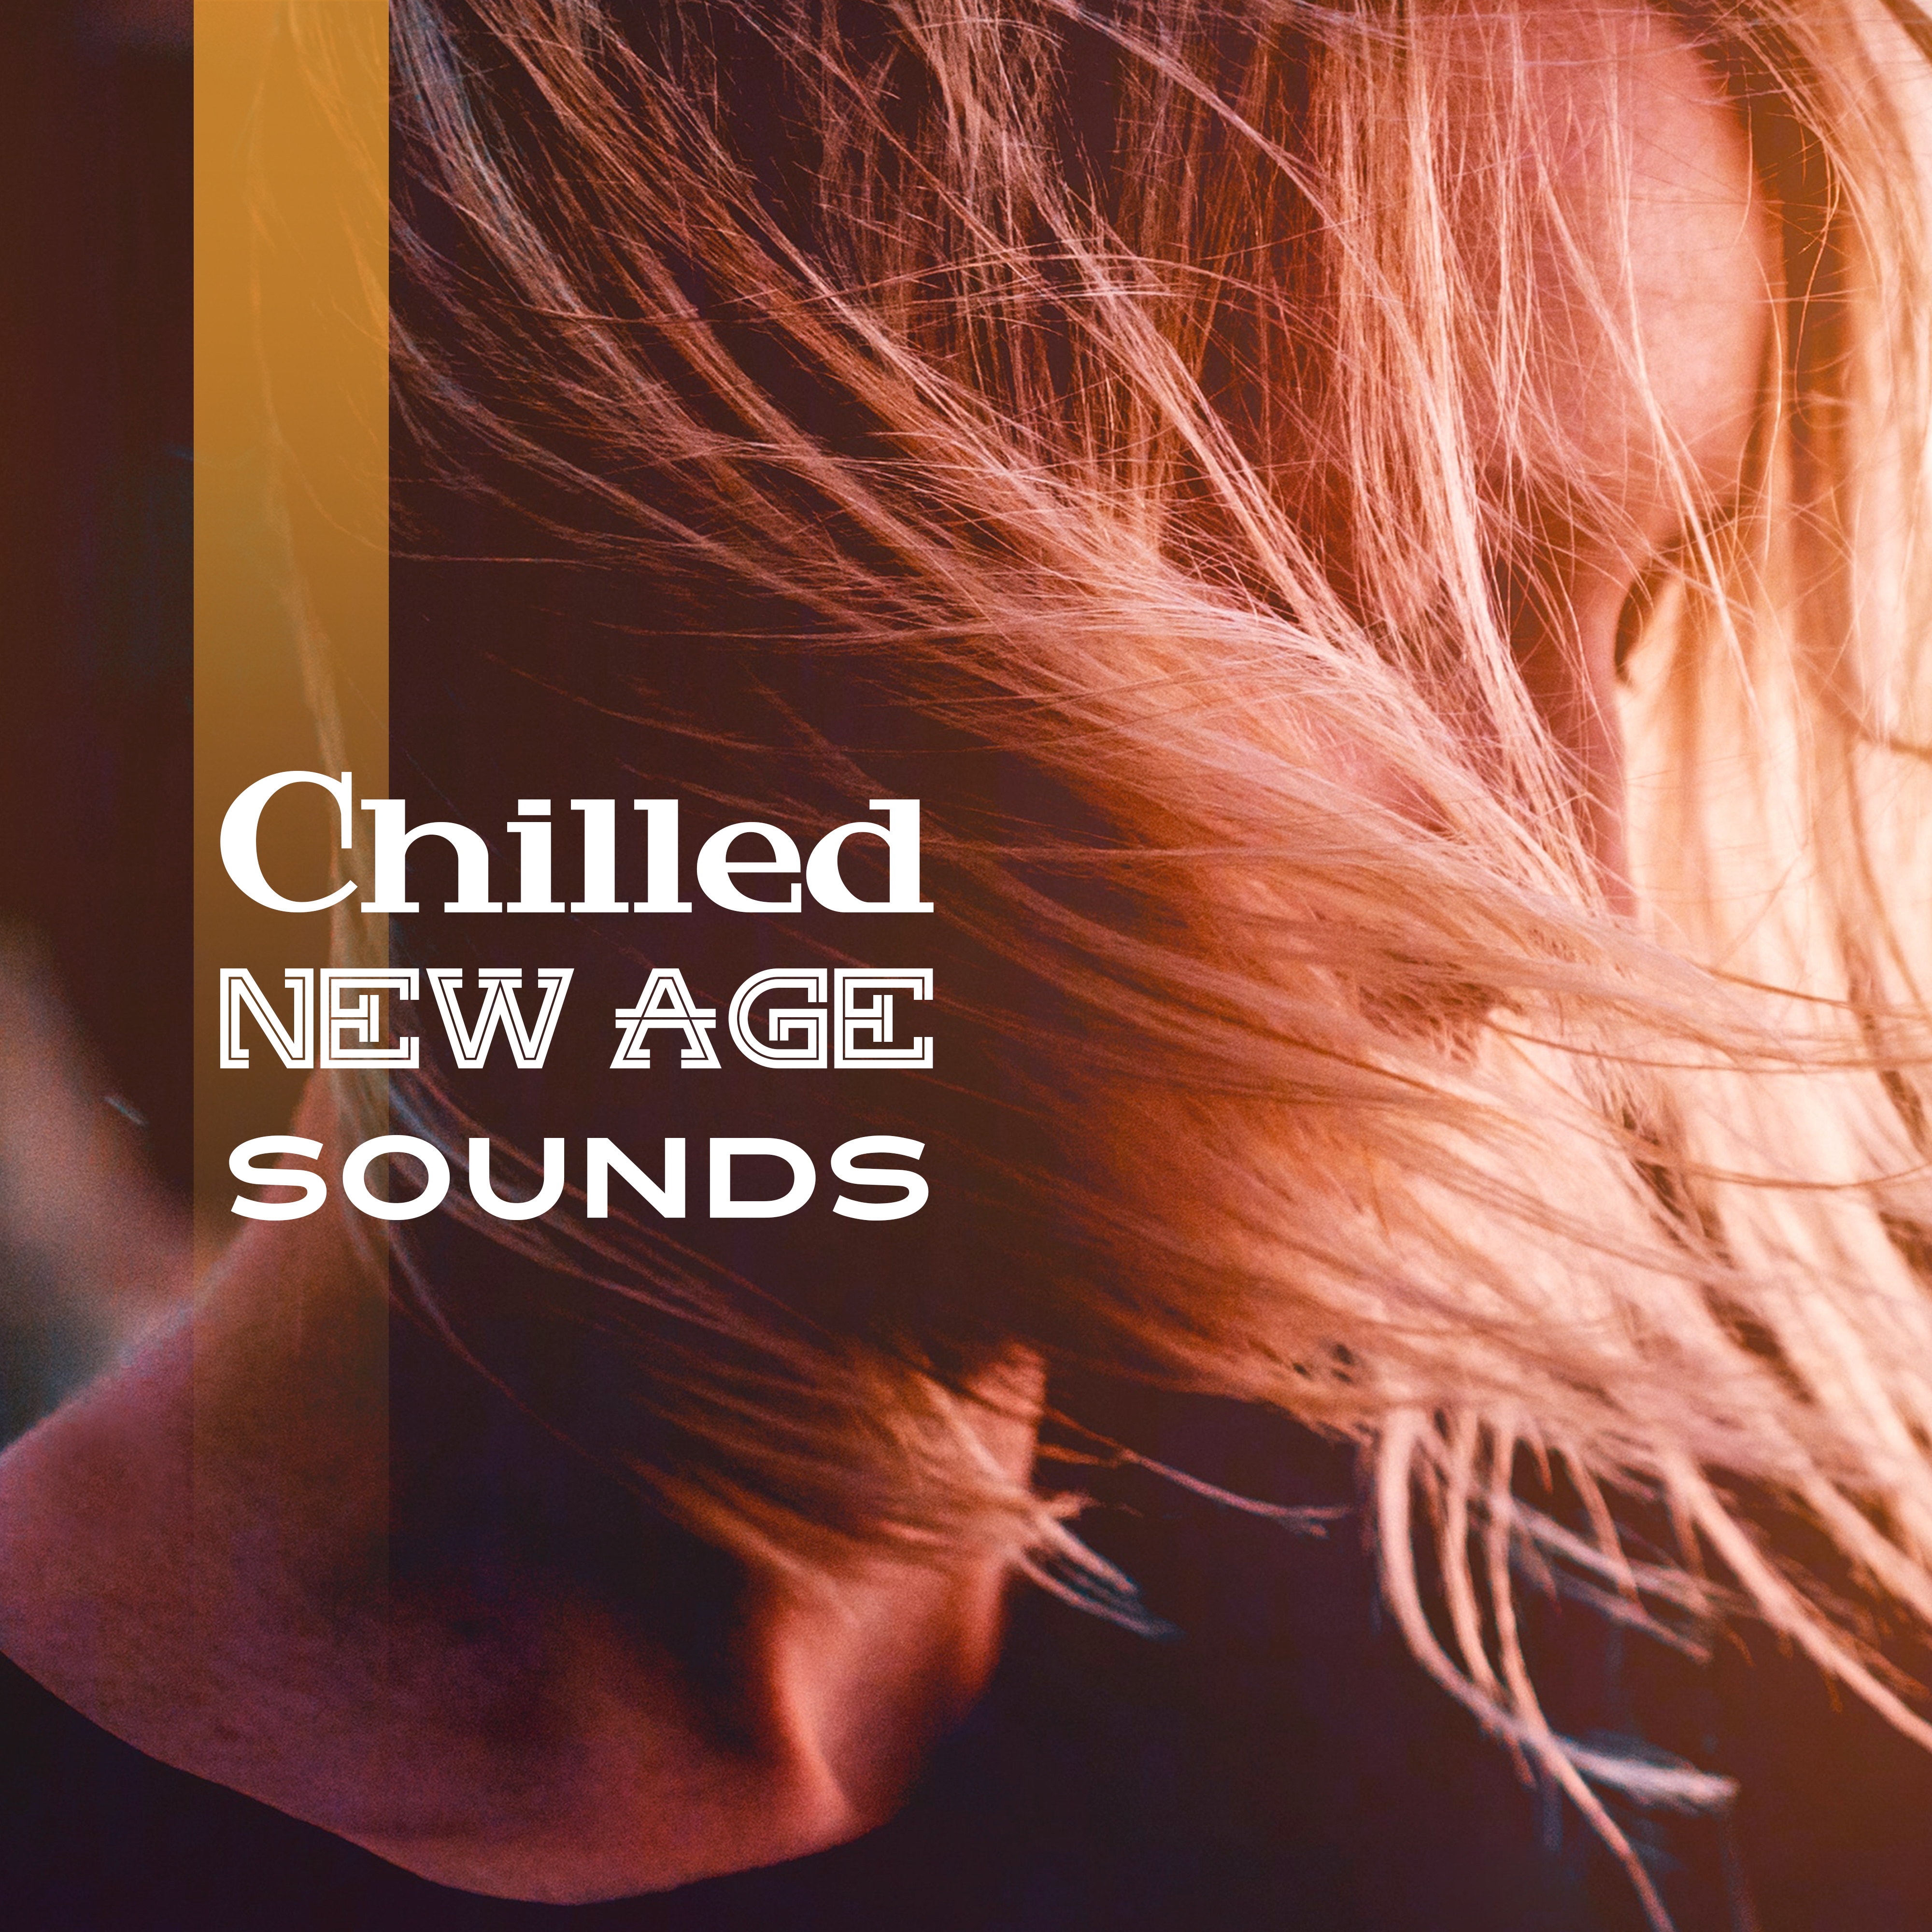 Chilled New Age Sounds